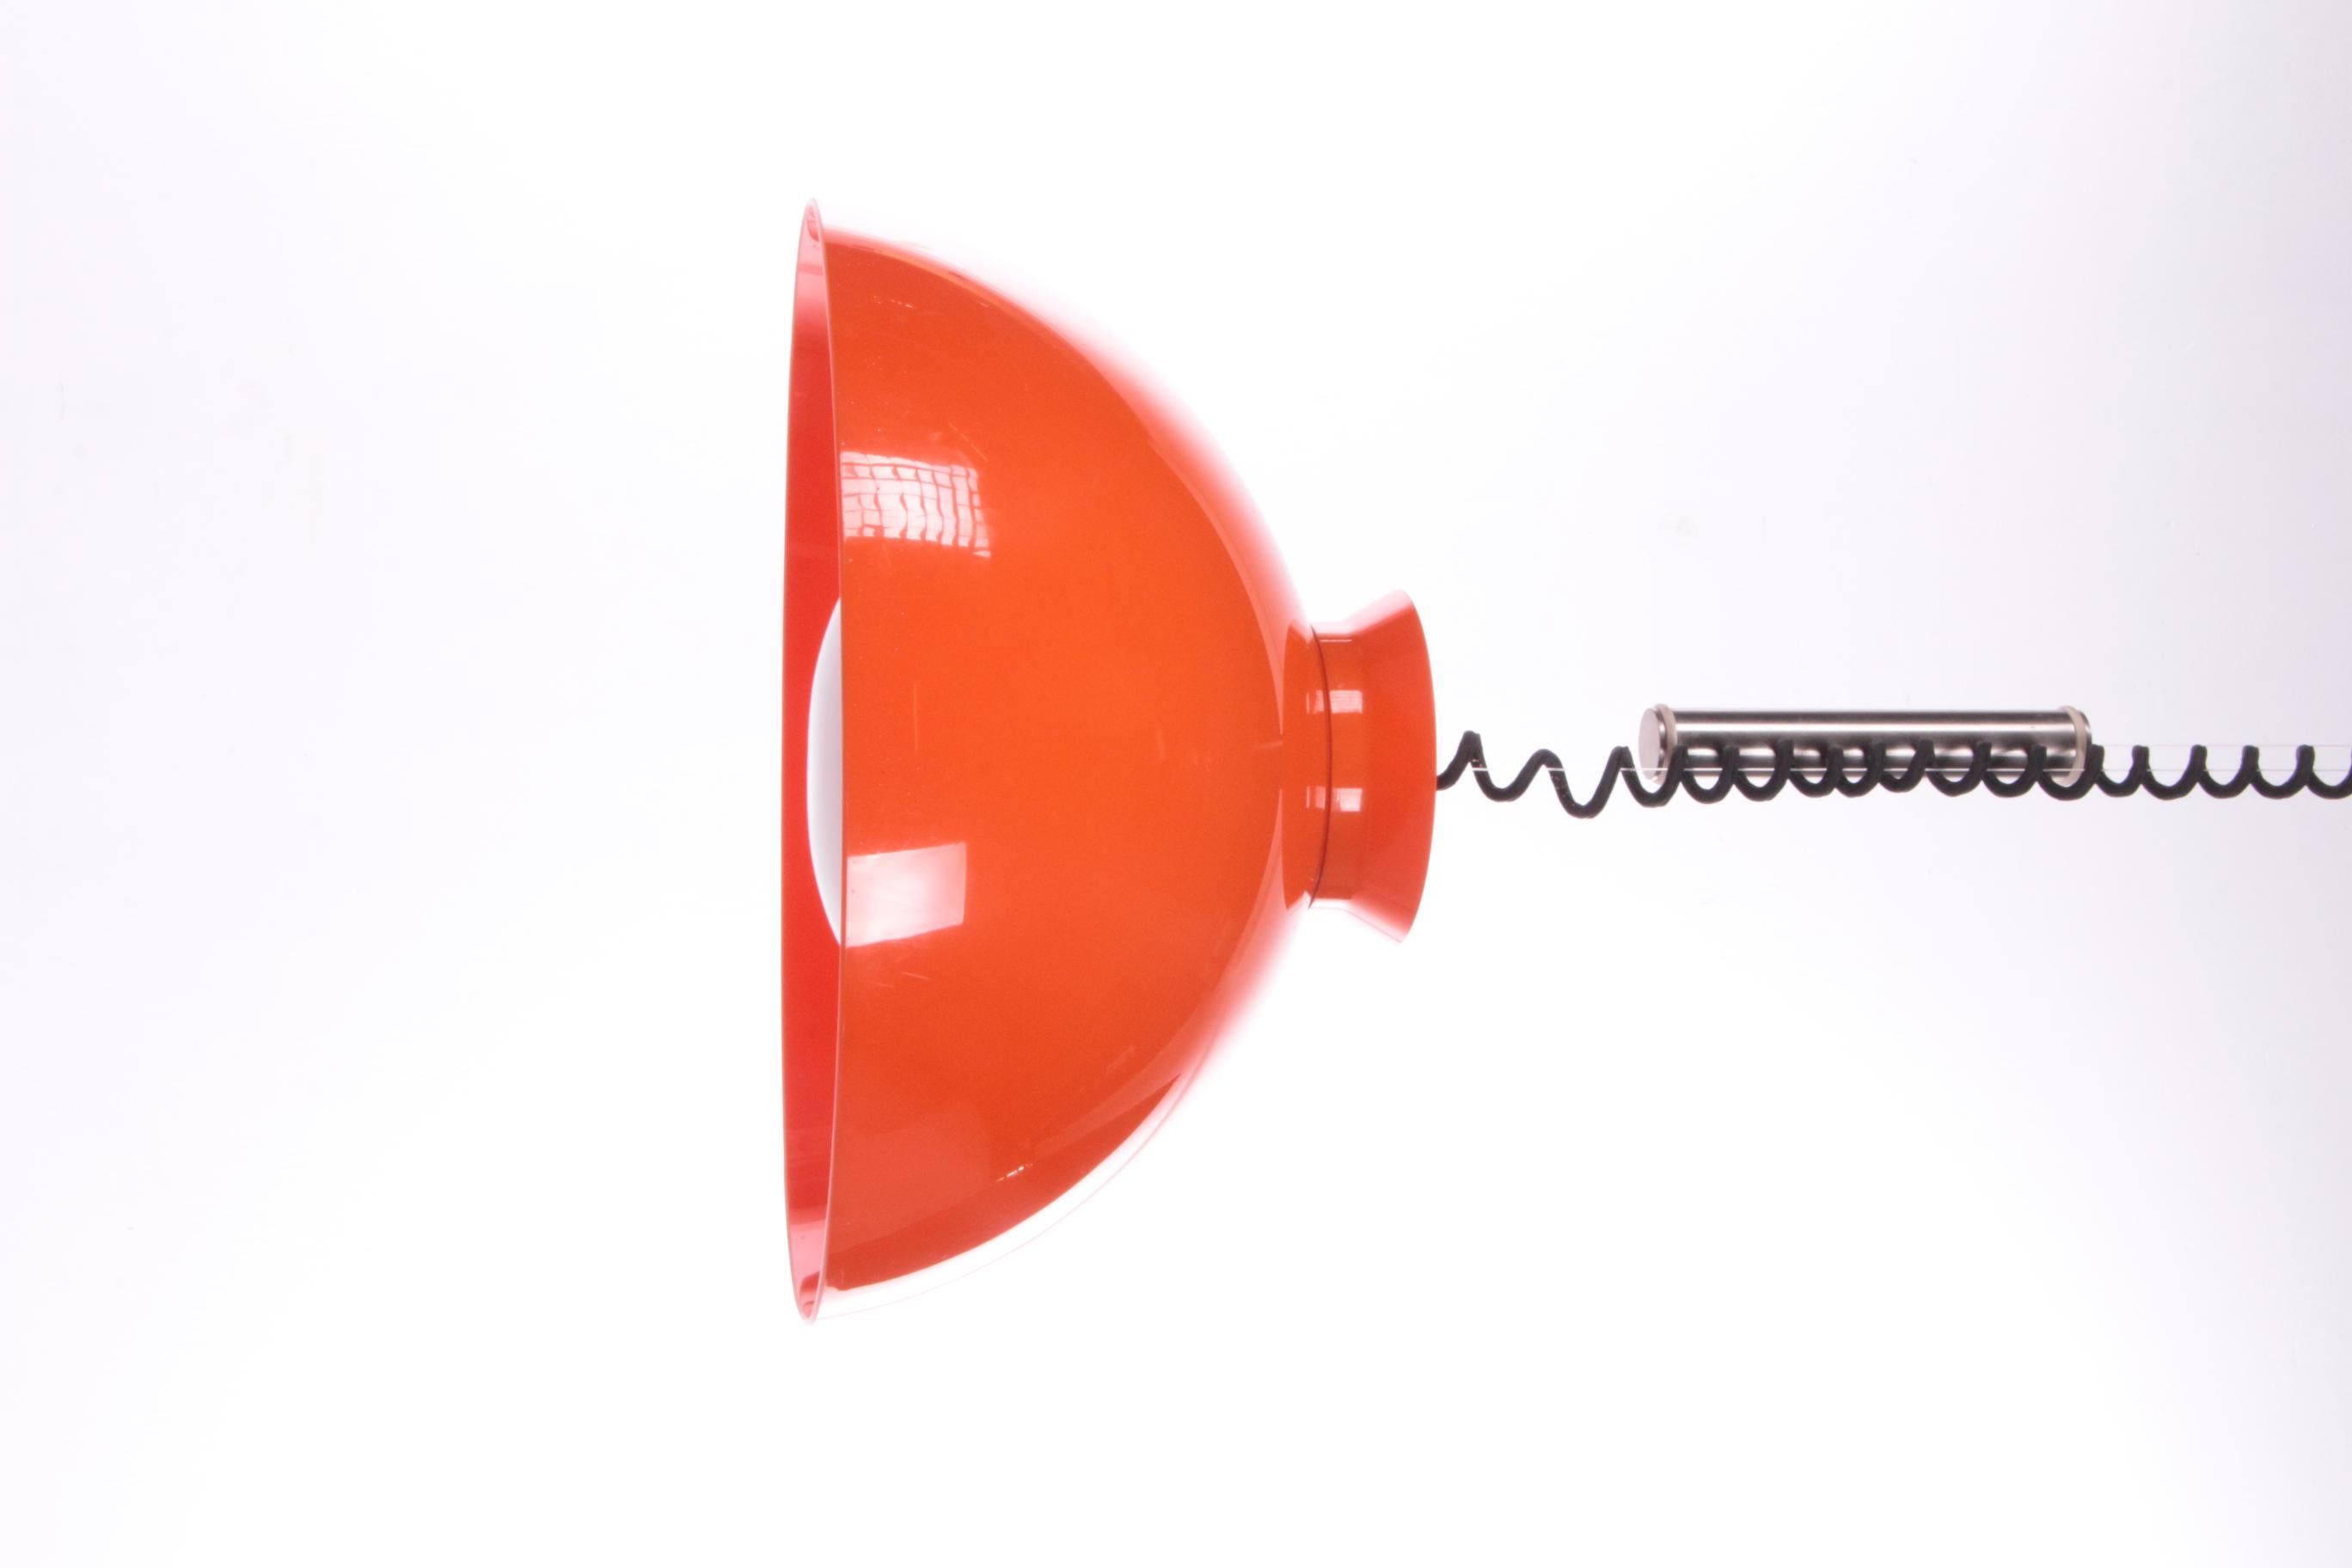 Mid-Century Modern Hanging Lamp Orange Design by Achille & Pier Giacomo by Kartell, 1959 For Sale